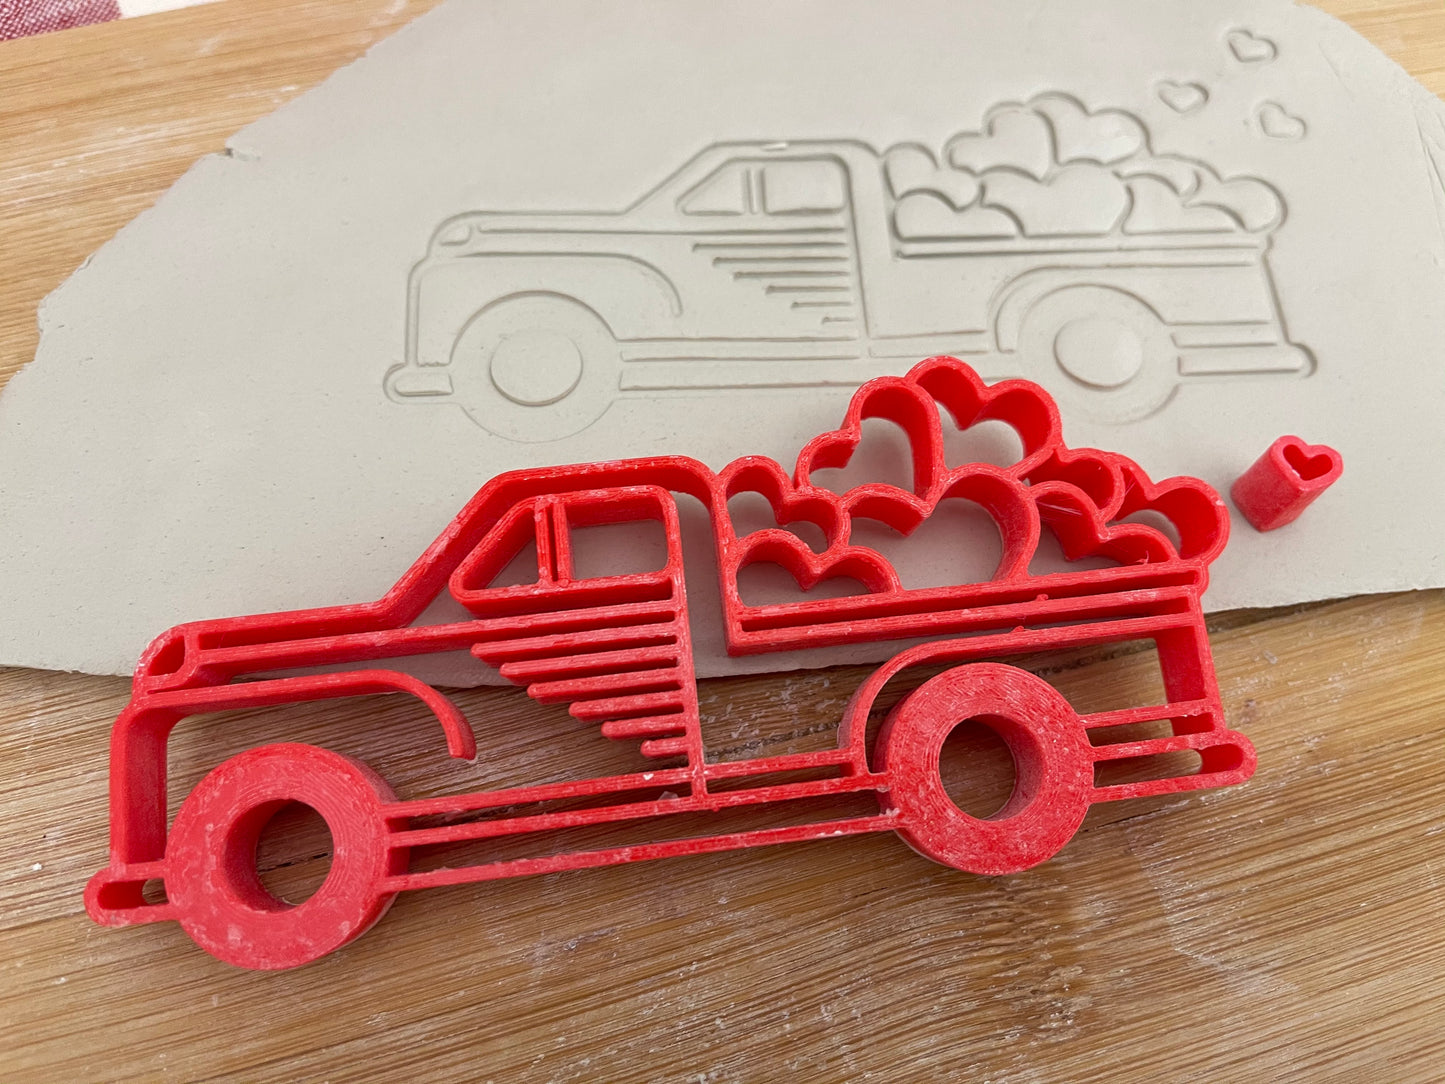 Pottery Stamp, Vintage Truck with hearts design - multiple sizes